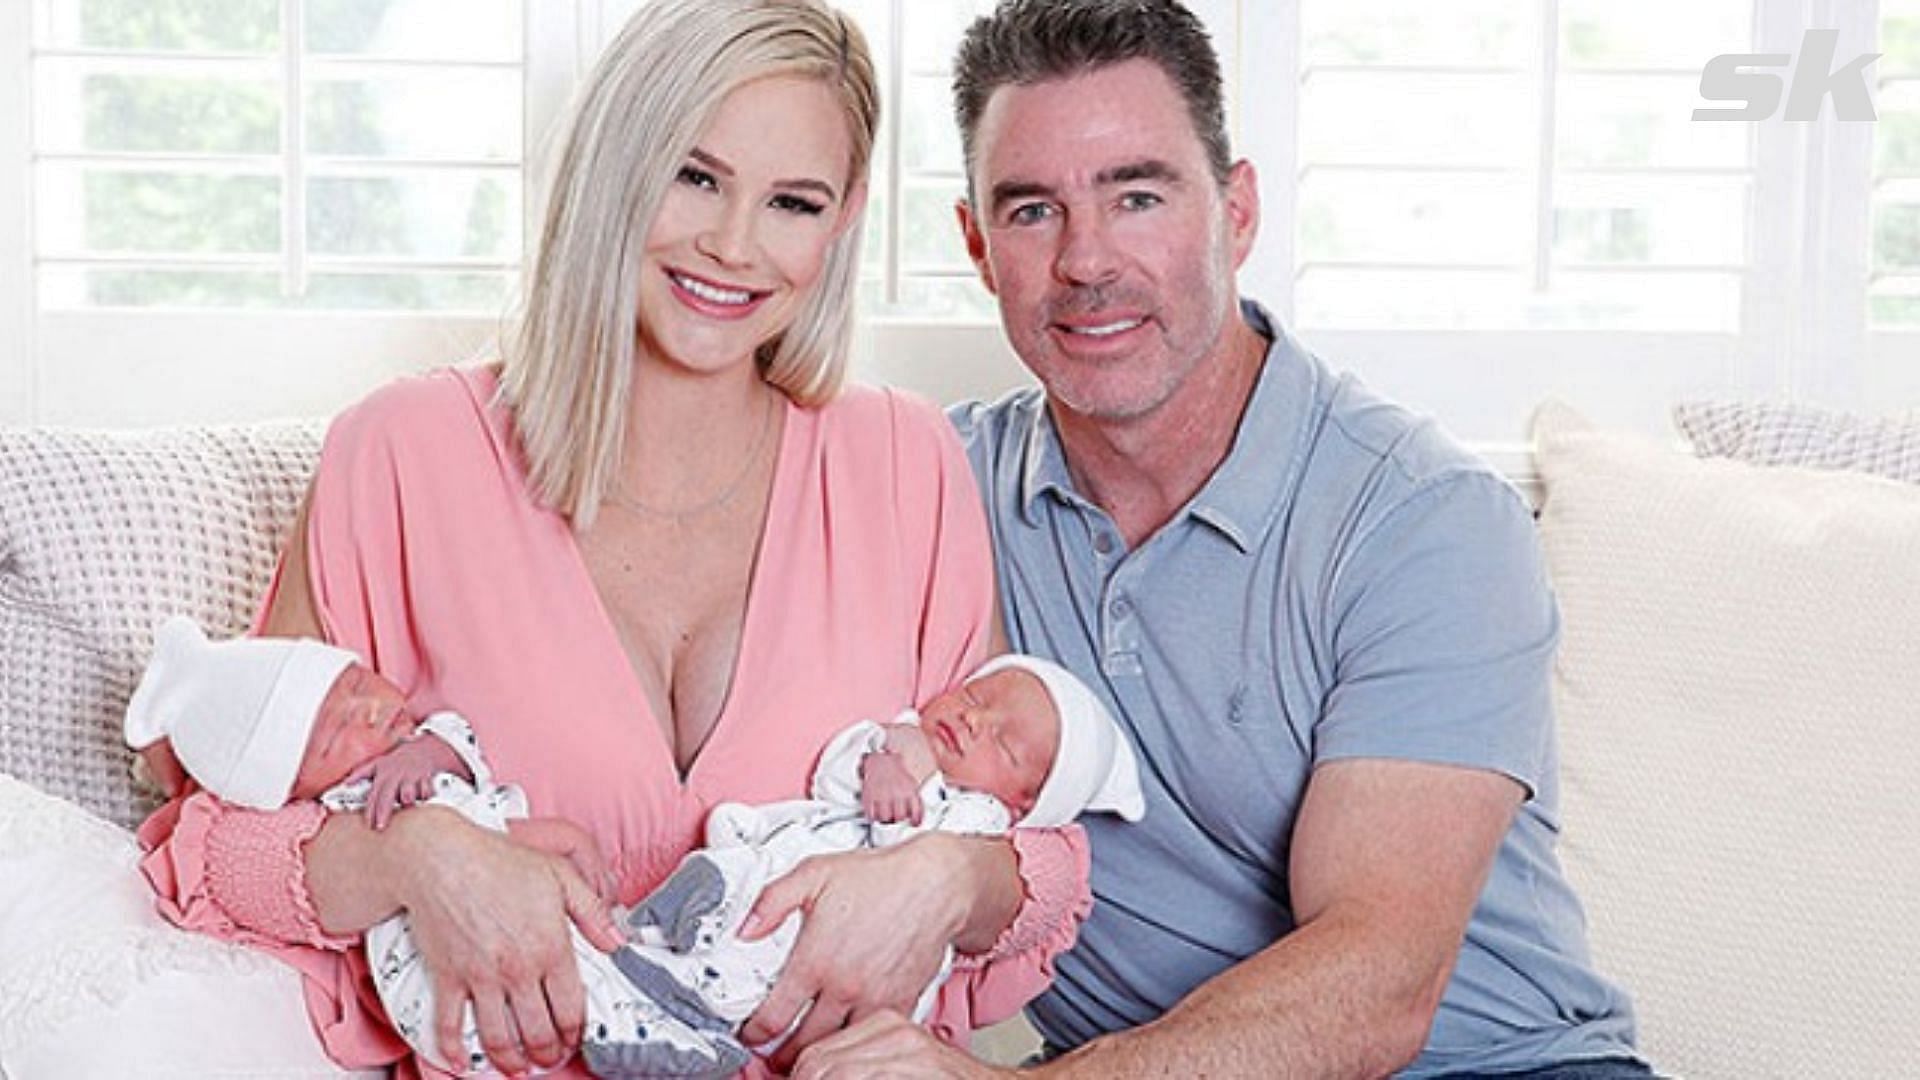 I'm sorry, this is very cringe - Retired MLB star Jim Edmonds' ex-wife Meghan  King brutally dissects former husband's wedding invitation